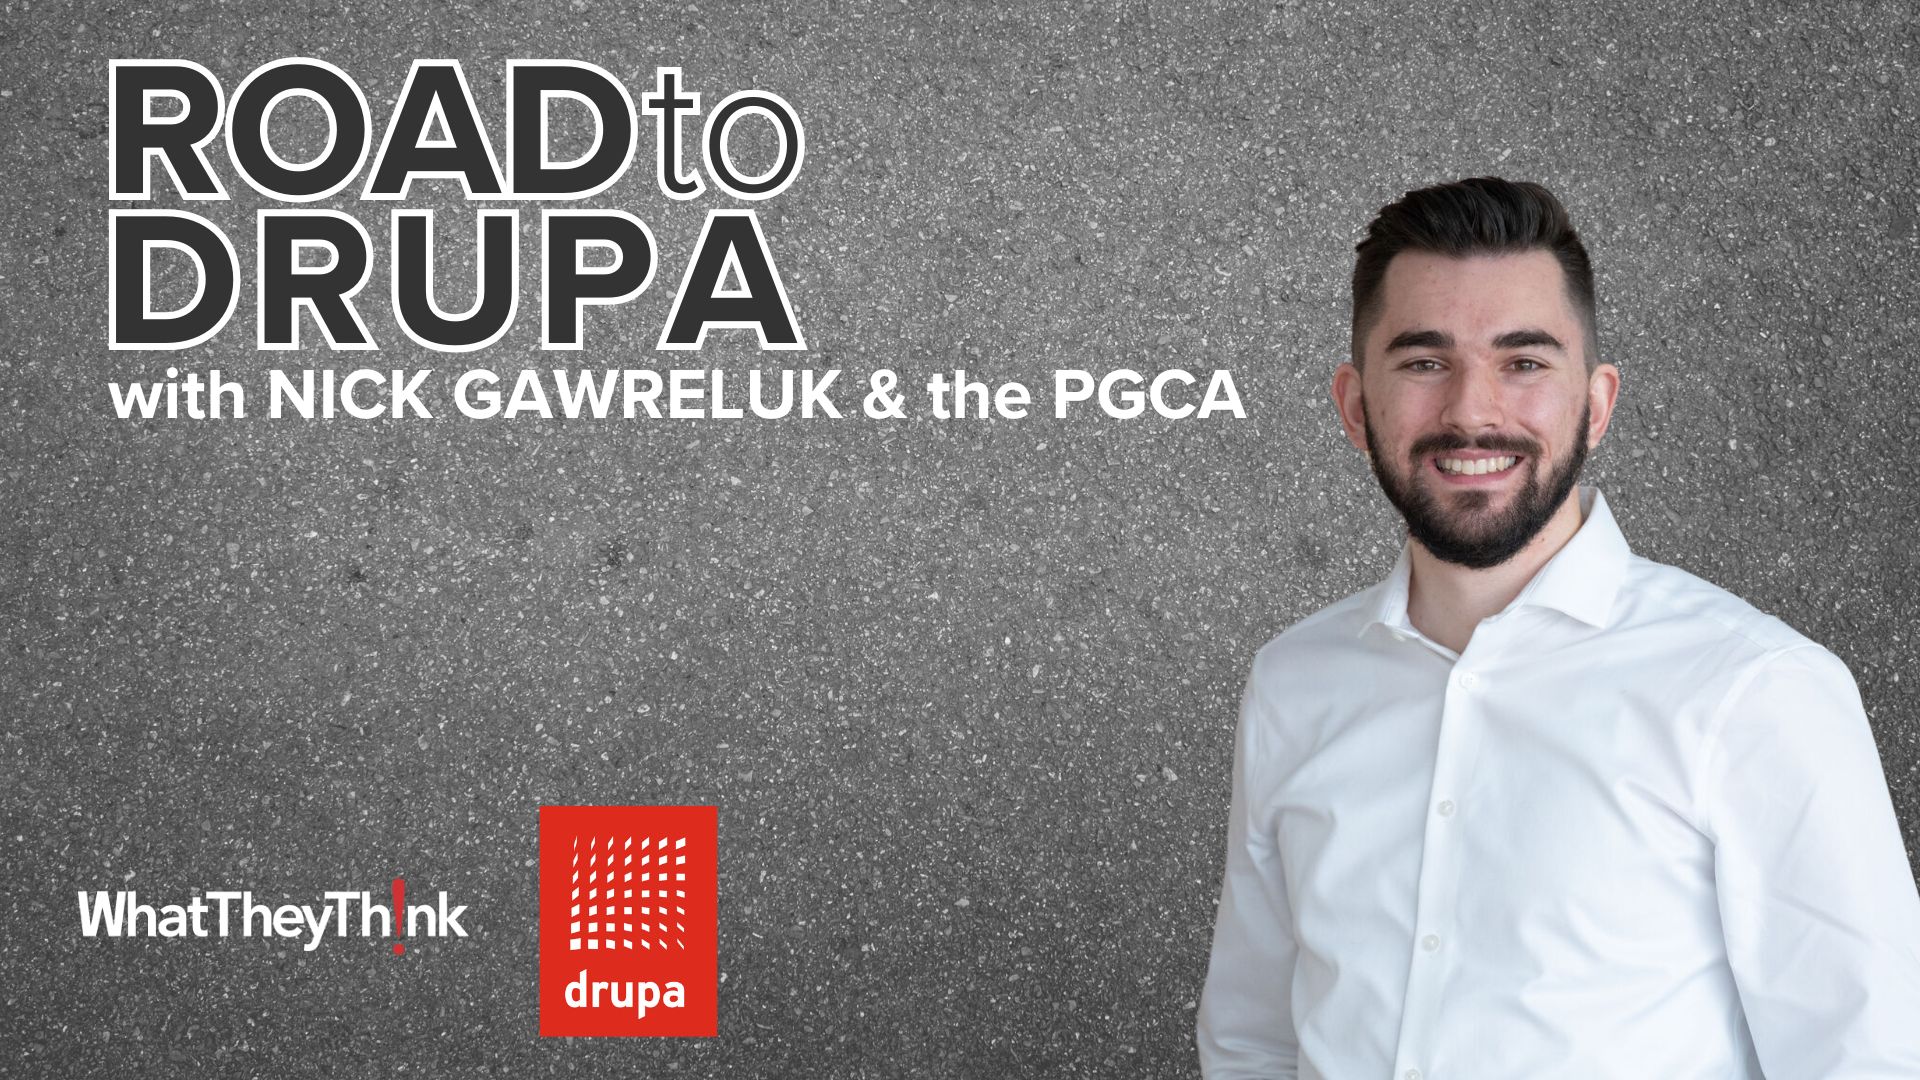 The Road to drupa: PGCA